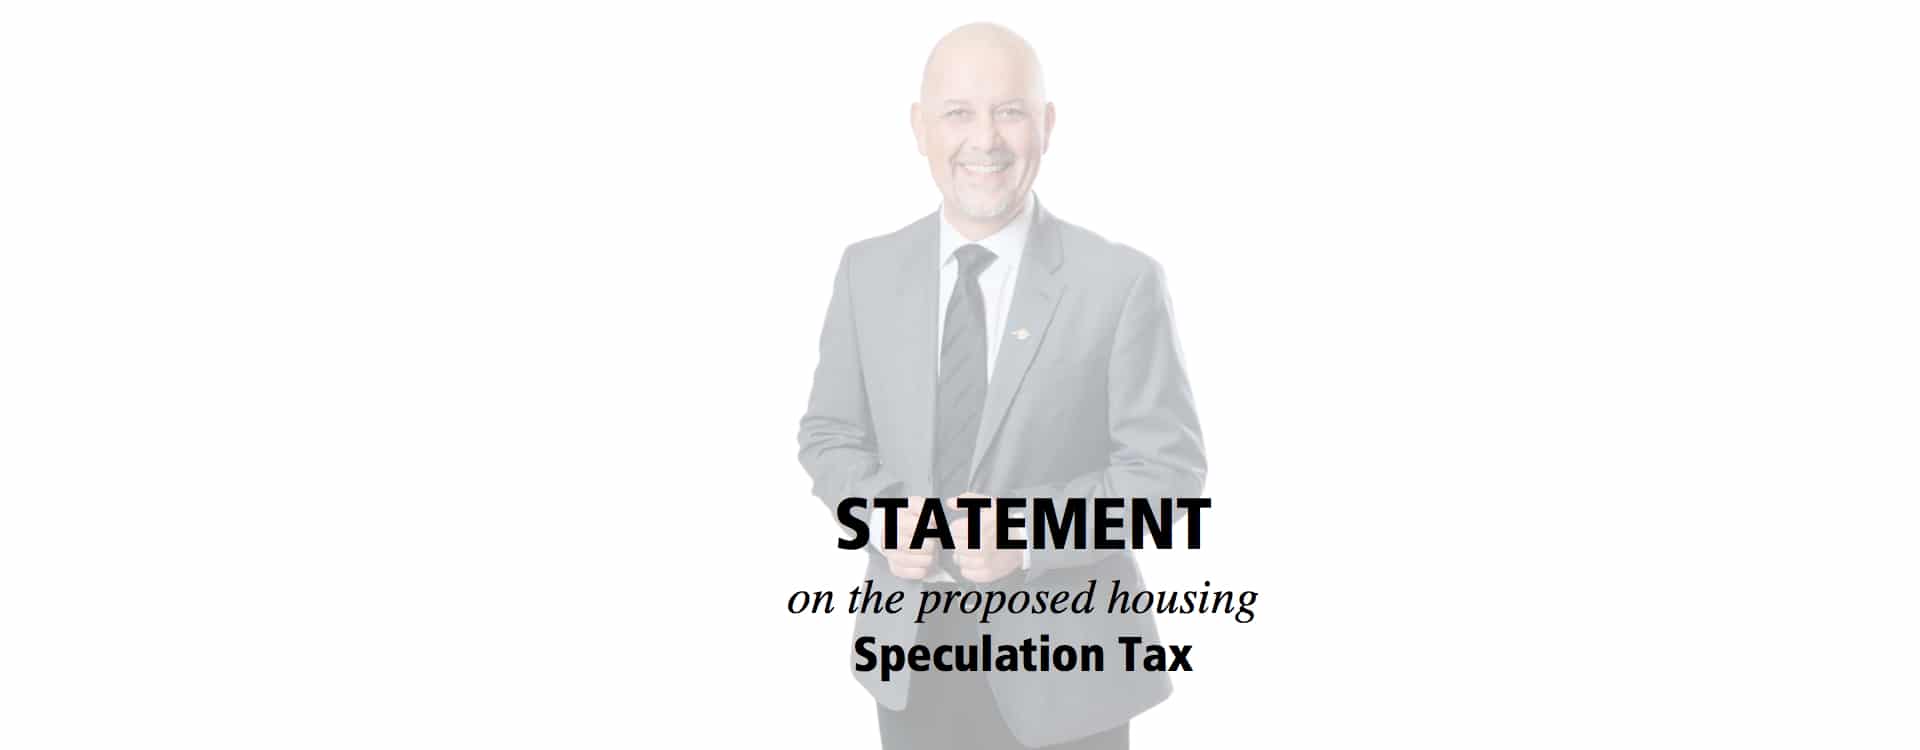 Statement on proposed housing Speculation Tax